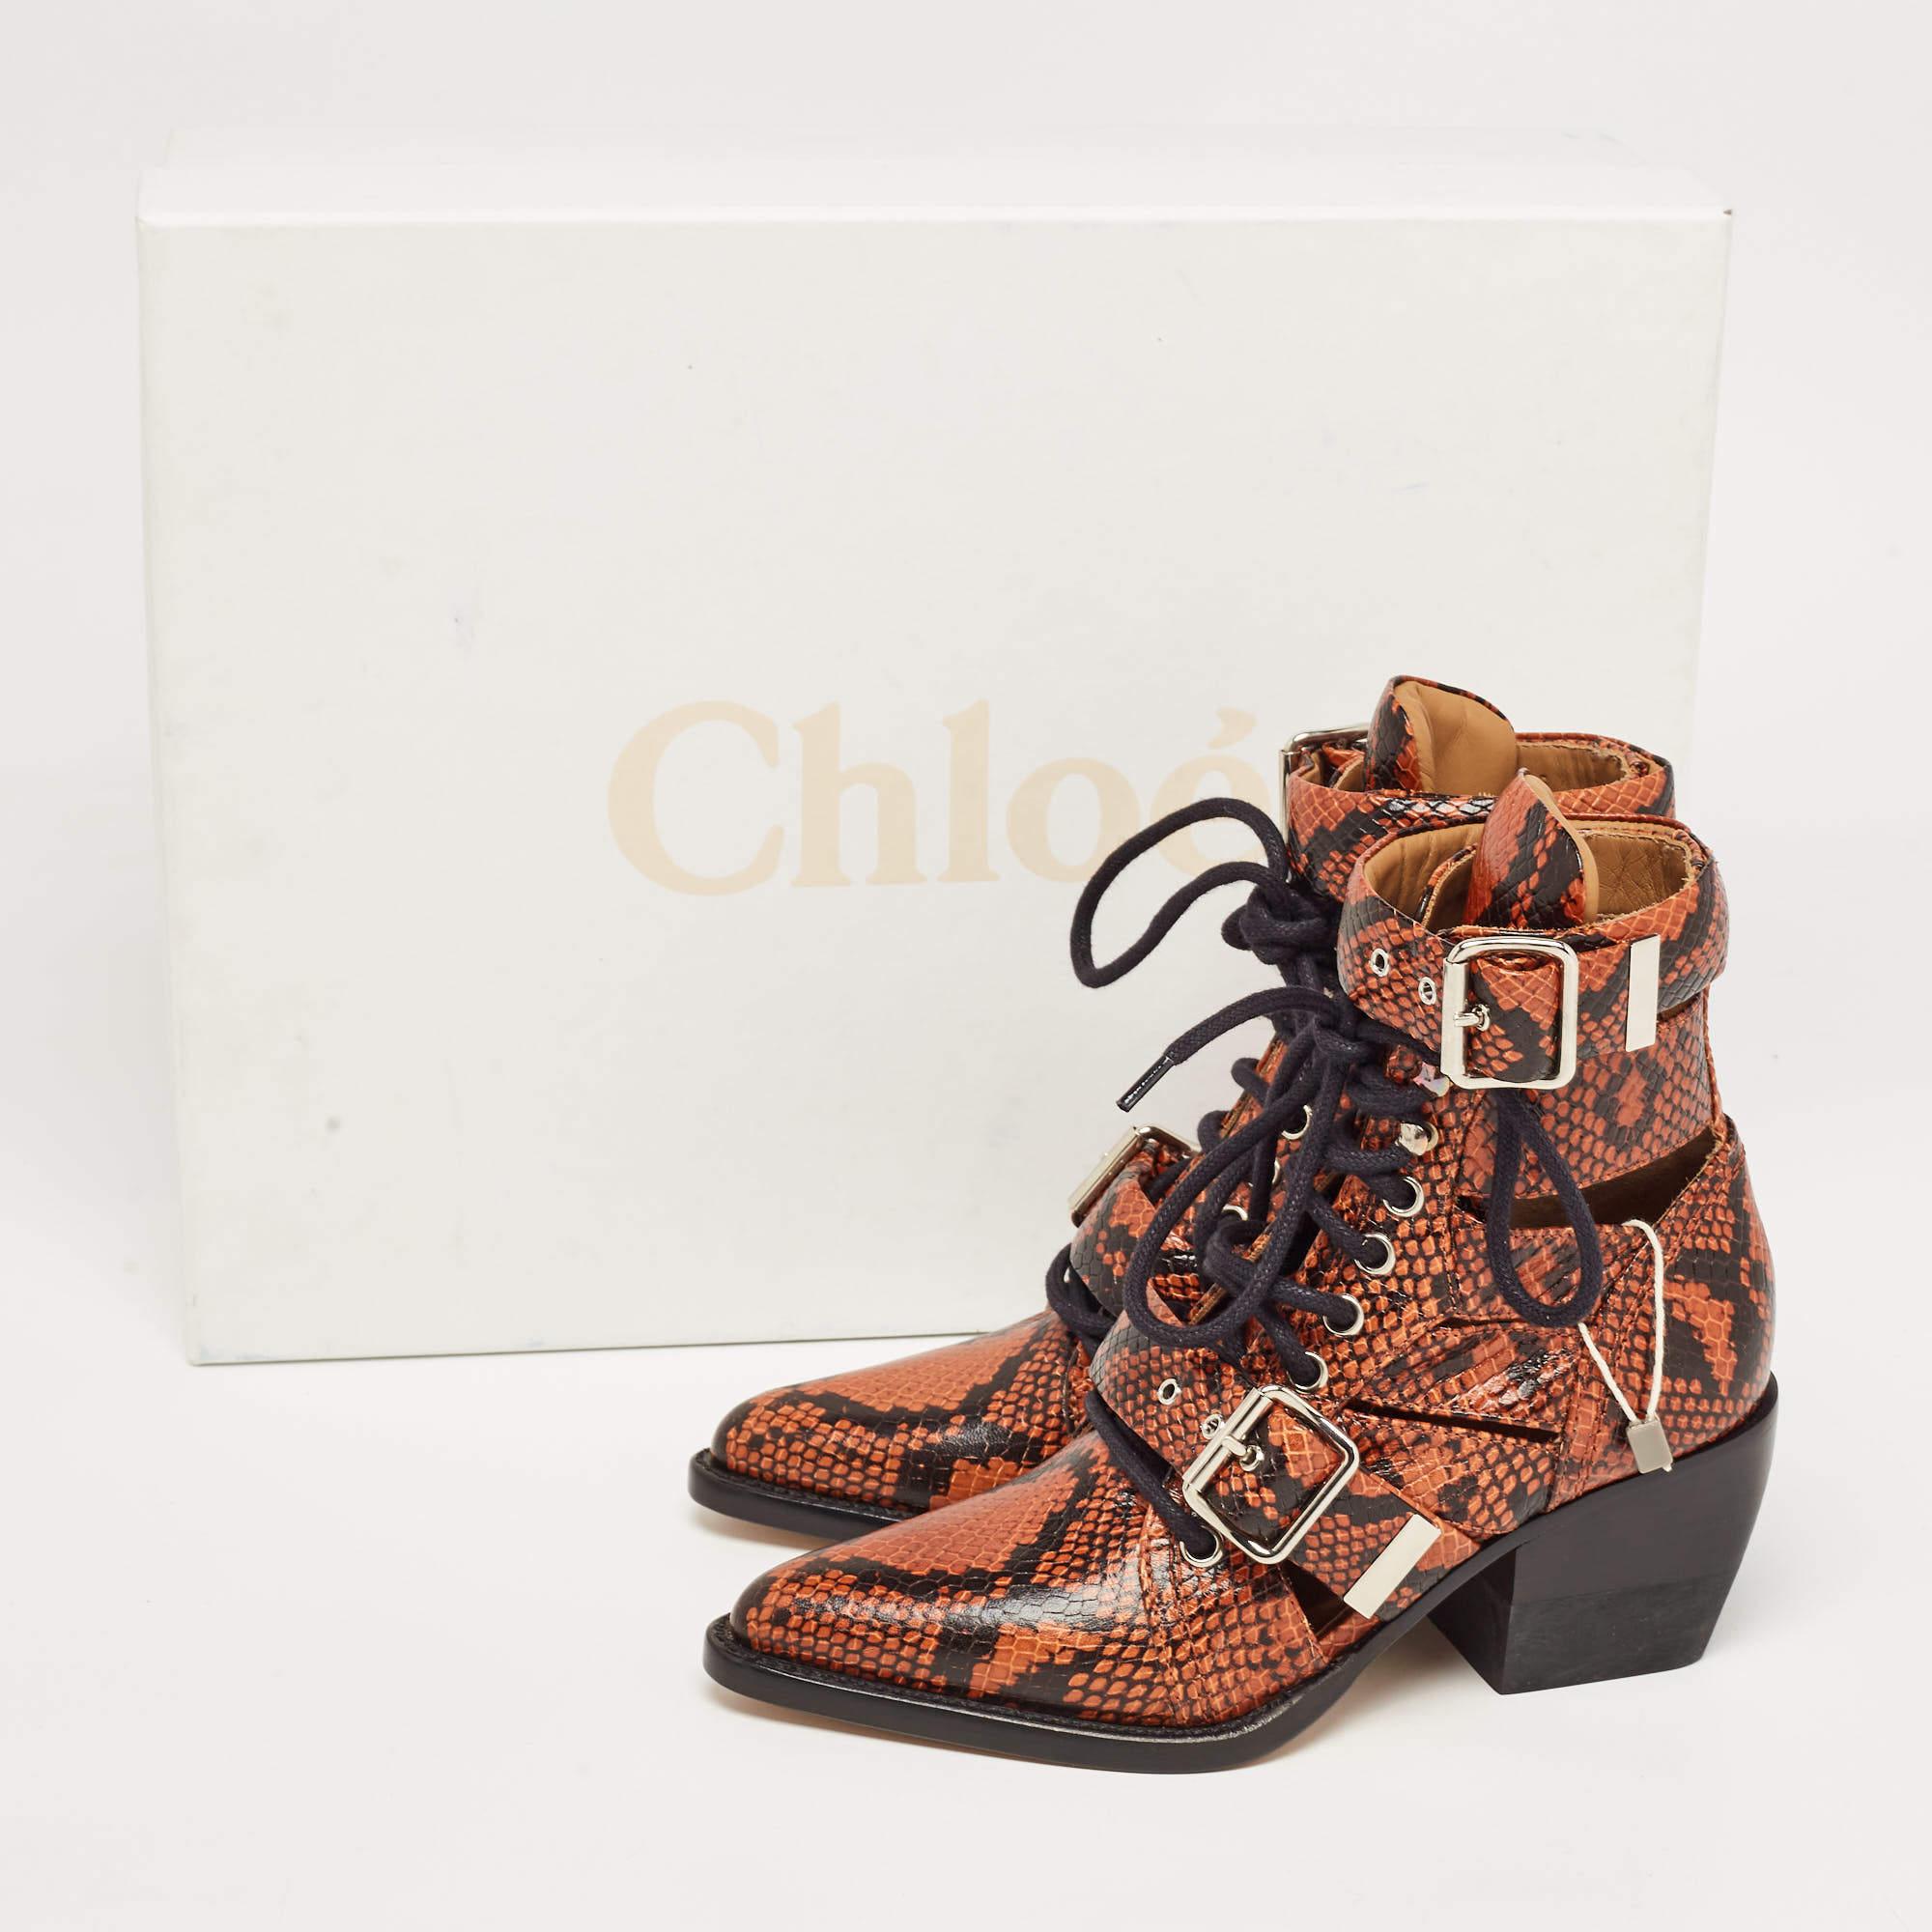 Chloe Brown Python Embossed Leather Rylee Ankle Boots Size 34.5 For Sale 3